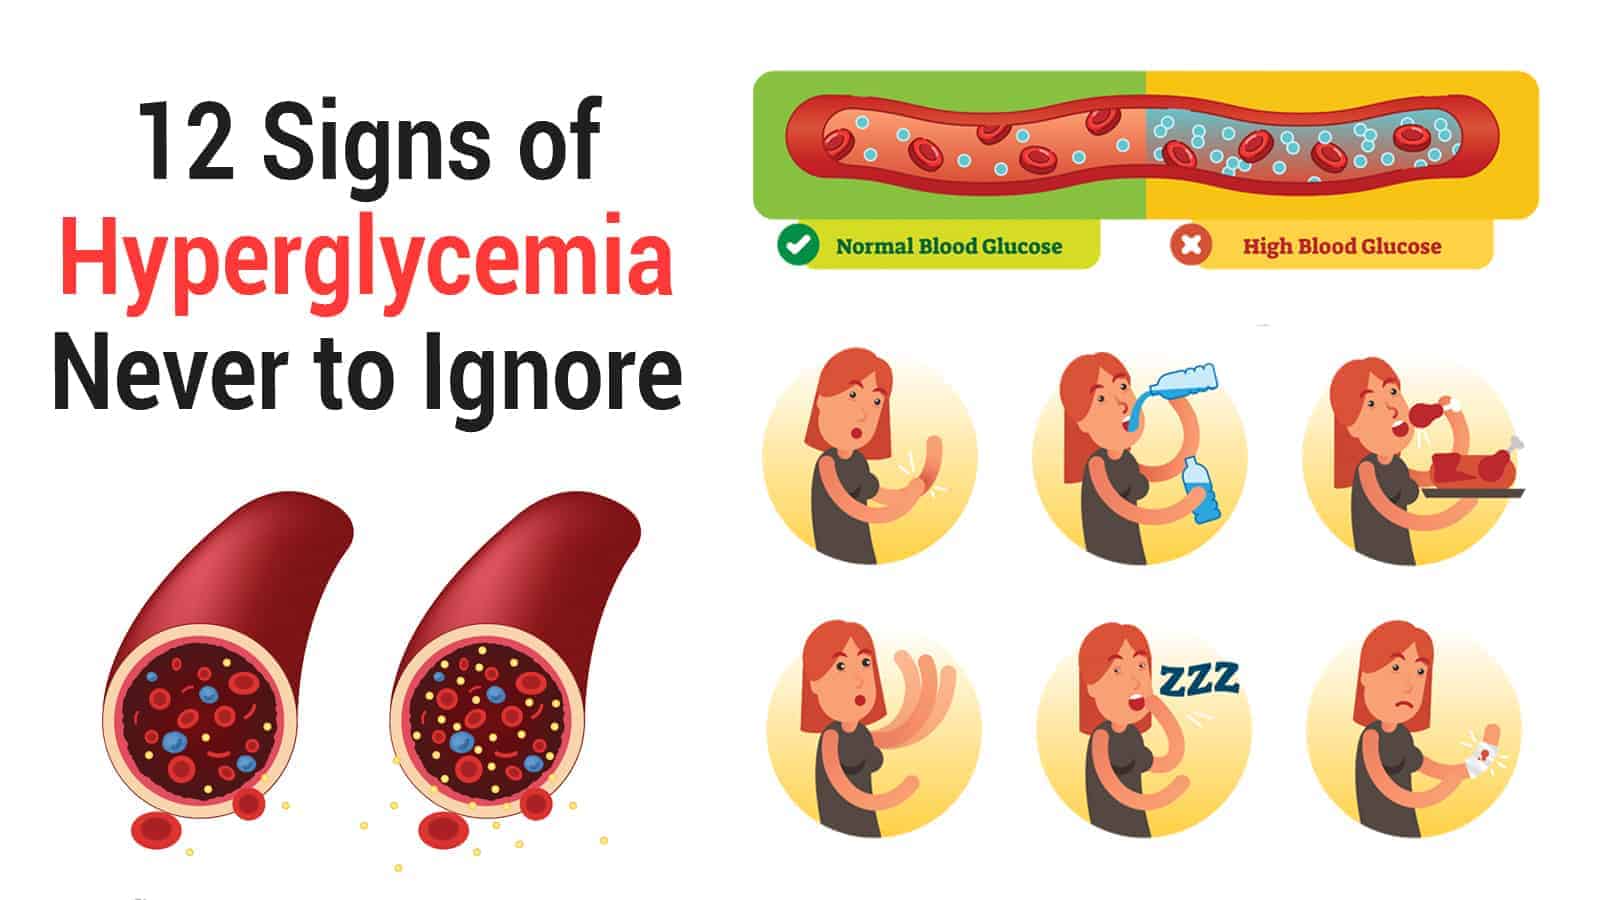 12 Signs of Hyperglycemia Never to Ignore